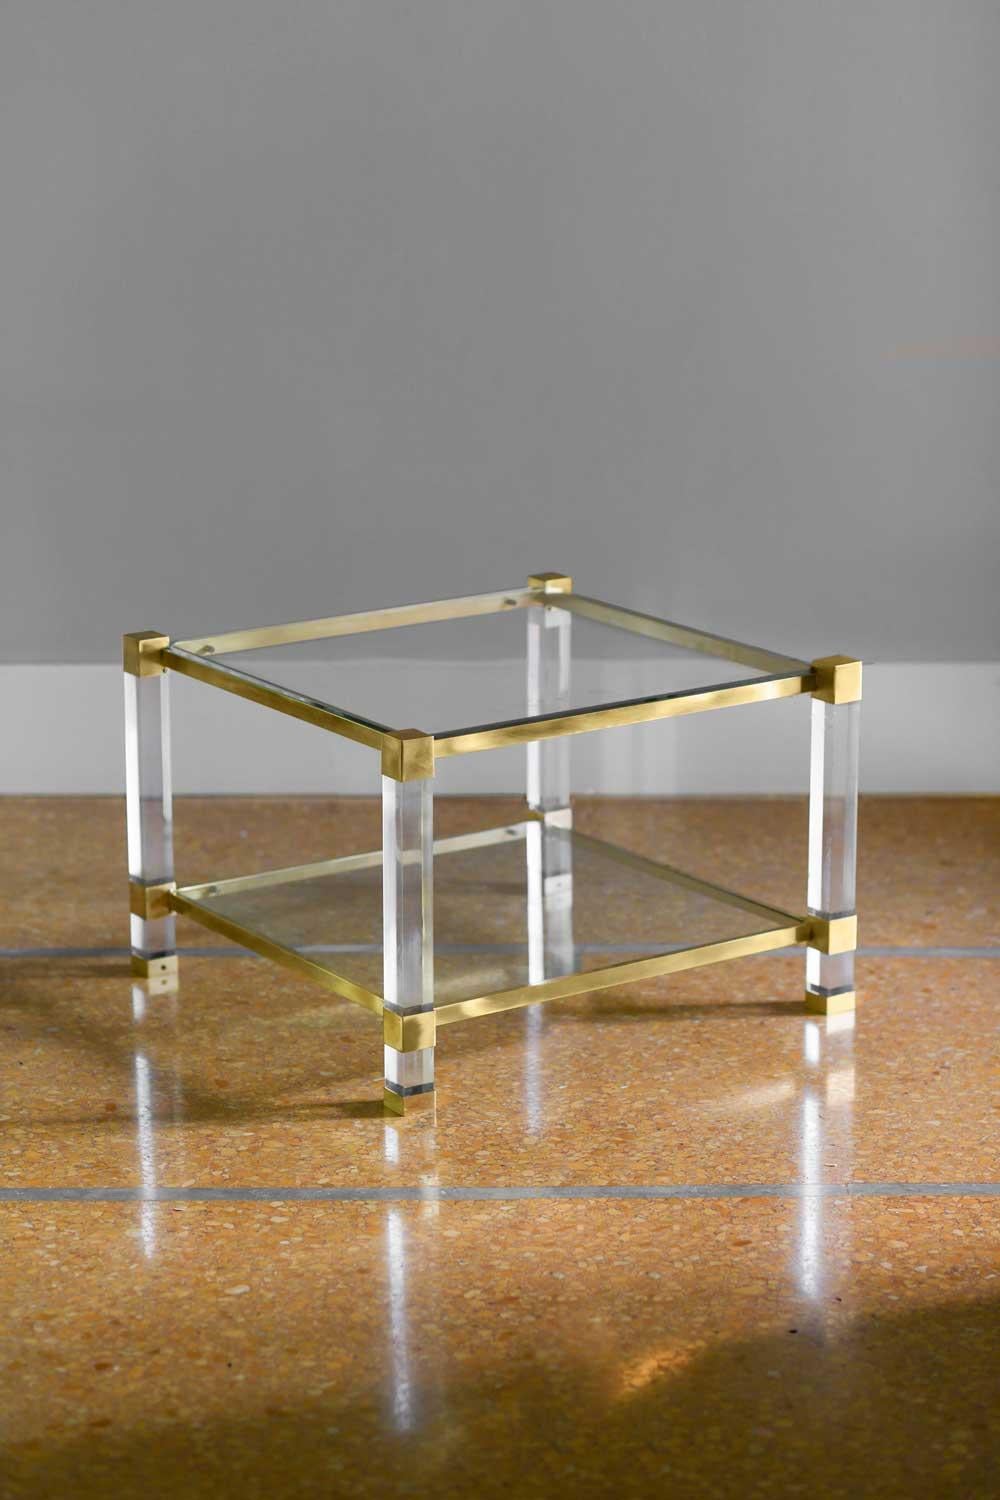 Pair of brass and glass coffee tables 1970
Product details
Dimensions of the single coffee table: 60L x 40H x 60D cm